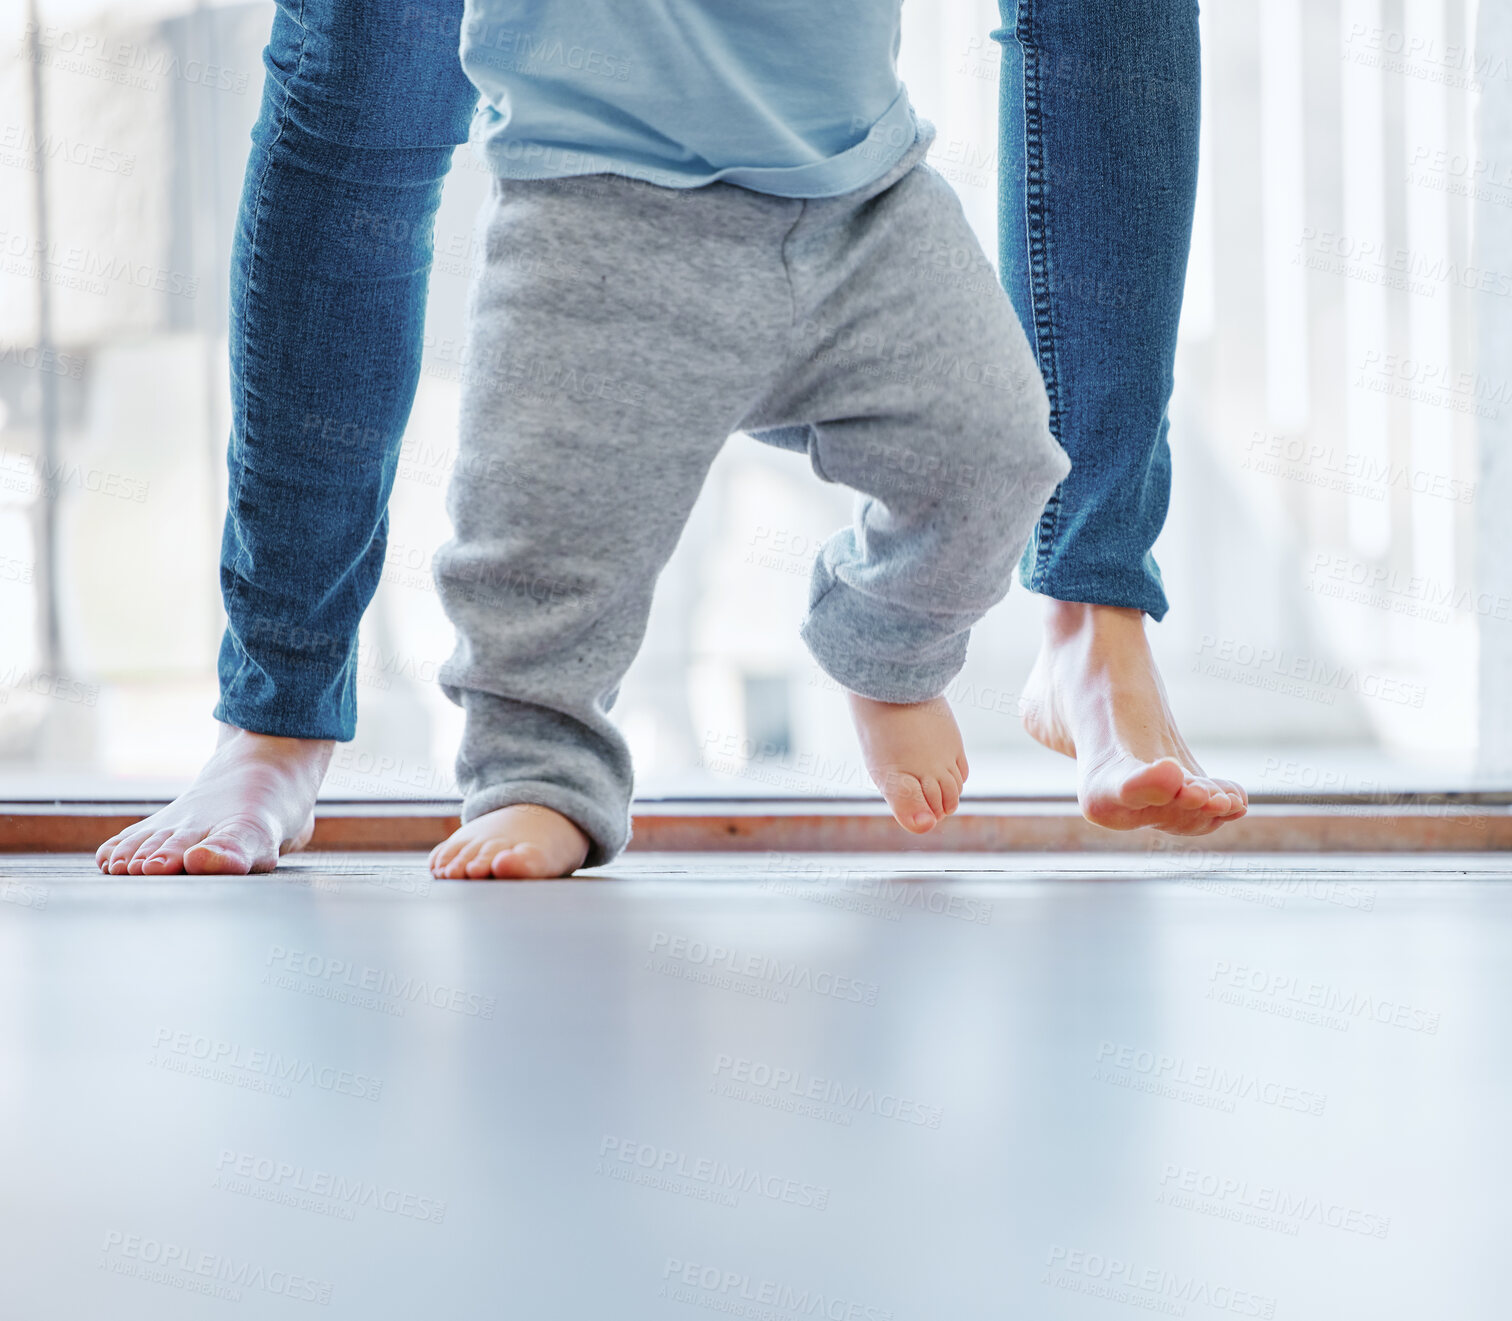 Buy stock photo Cropped shot of an unrecognizable little boy learning to walk with the help of his mother at home